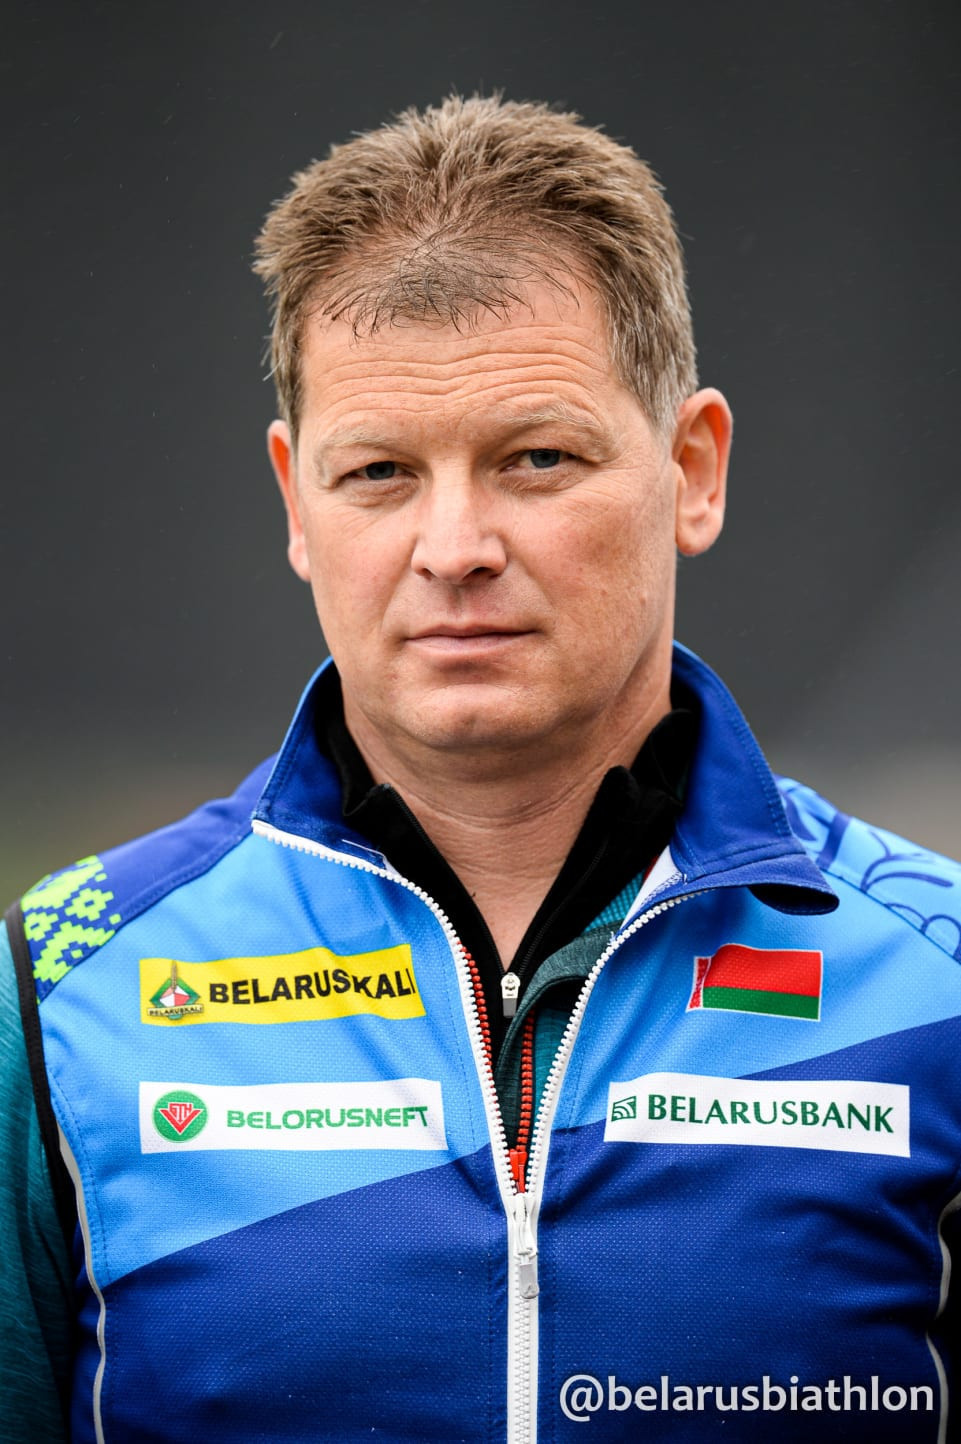 Reinhard Gösweiner leaves Austria after many years in coaching roles there ©Belarus Biathlon